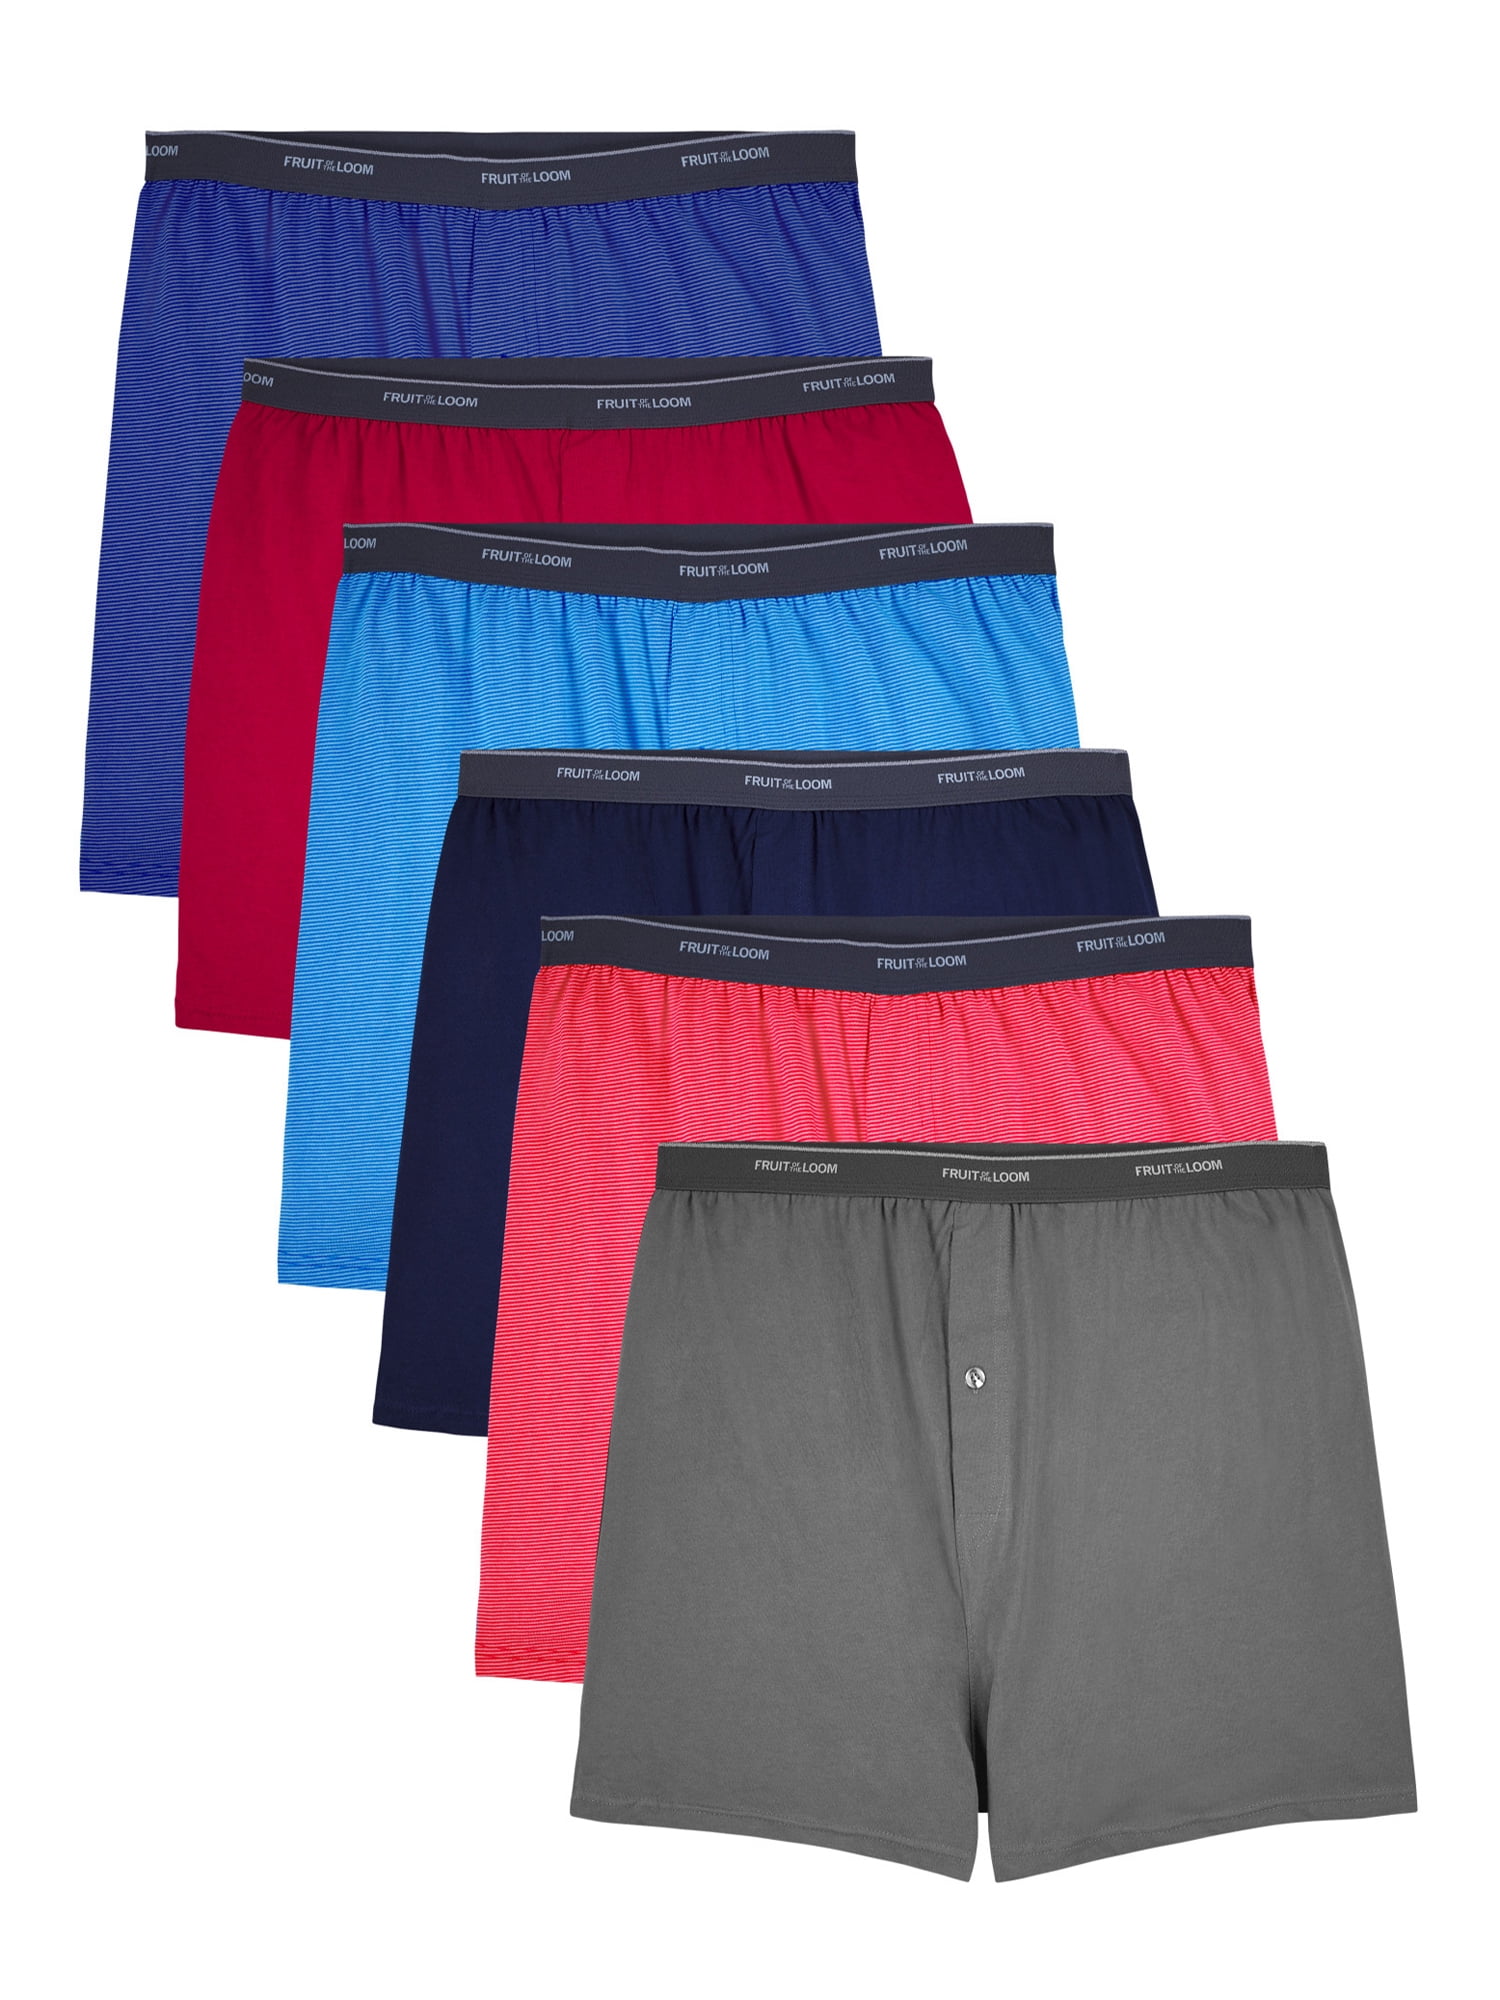 Essentials Men's Cotton Jersey Boxer Brief (Available in Big &  Tall), Pack of 5